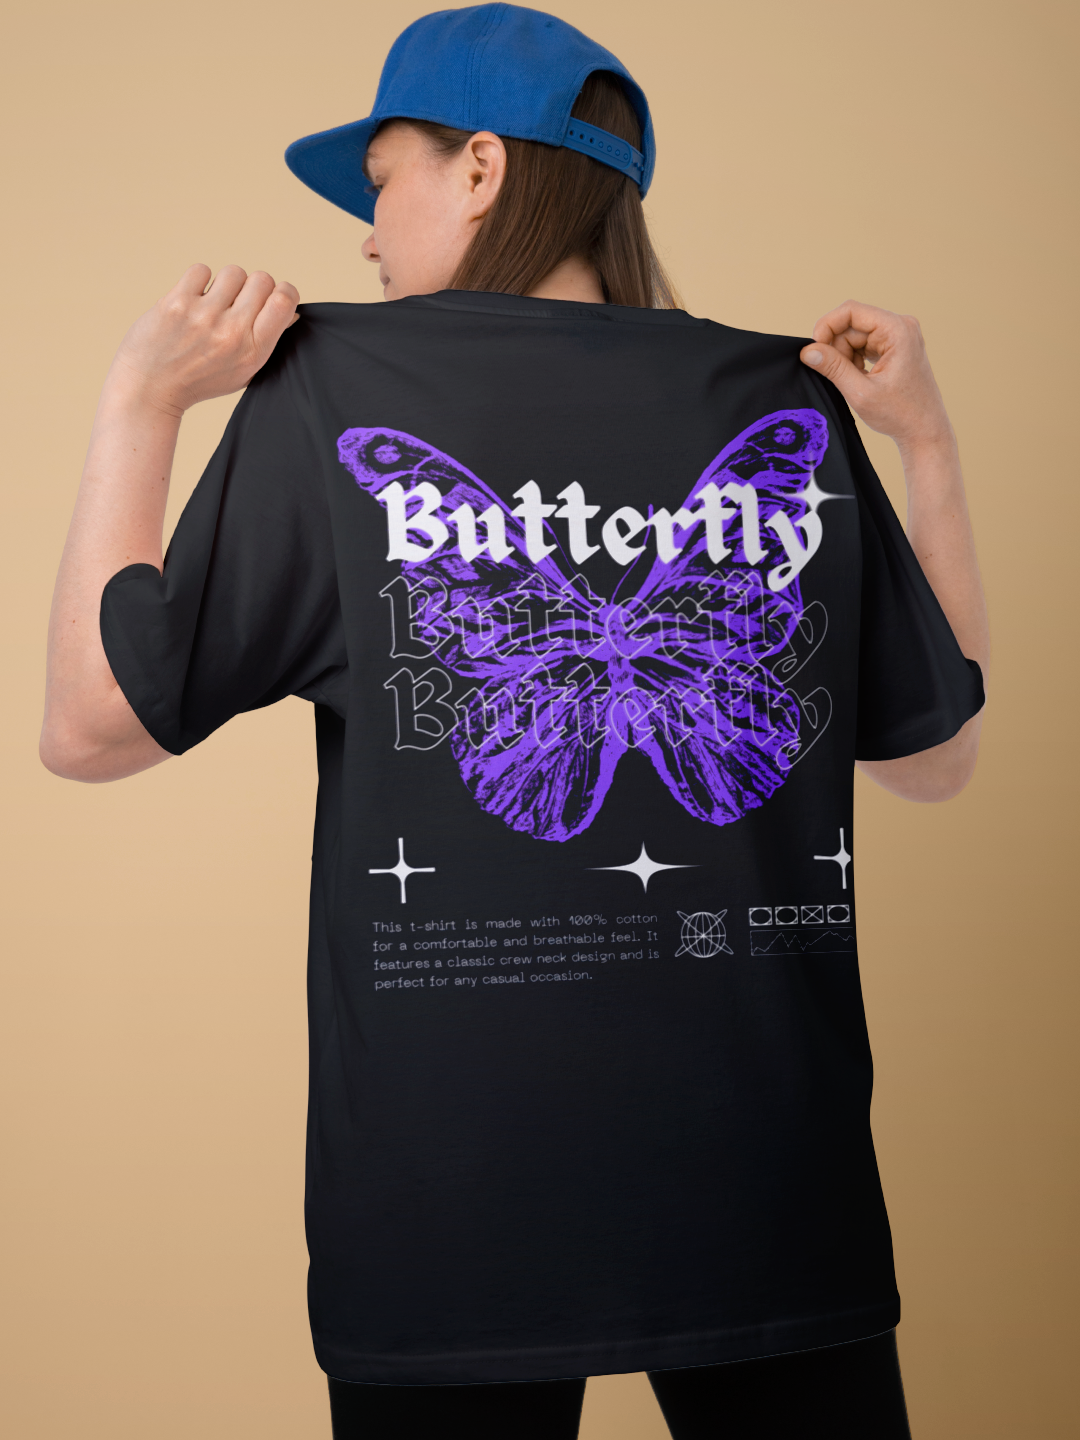 Women's Oversized T-shirt with Butterfly Design – Black Color Option